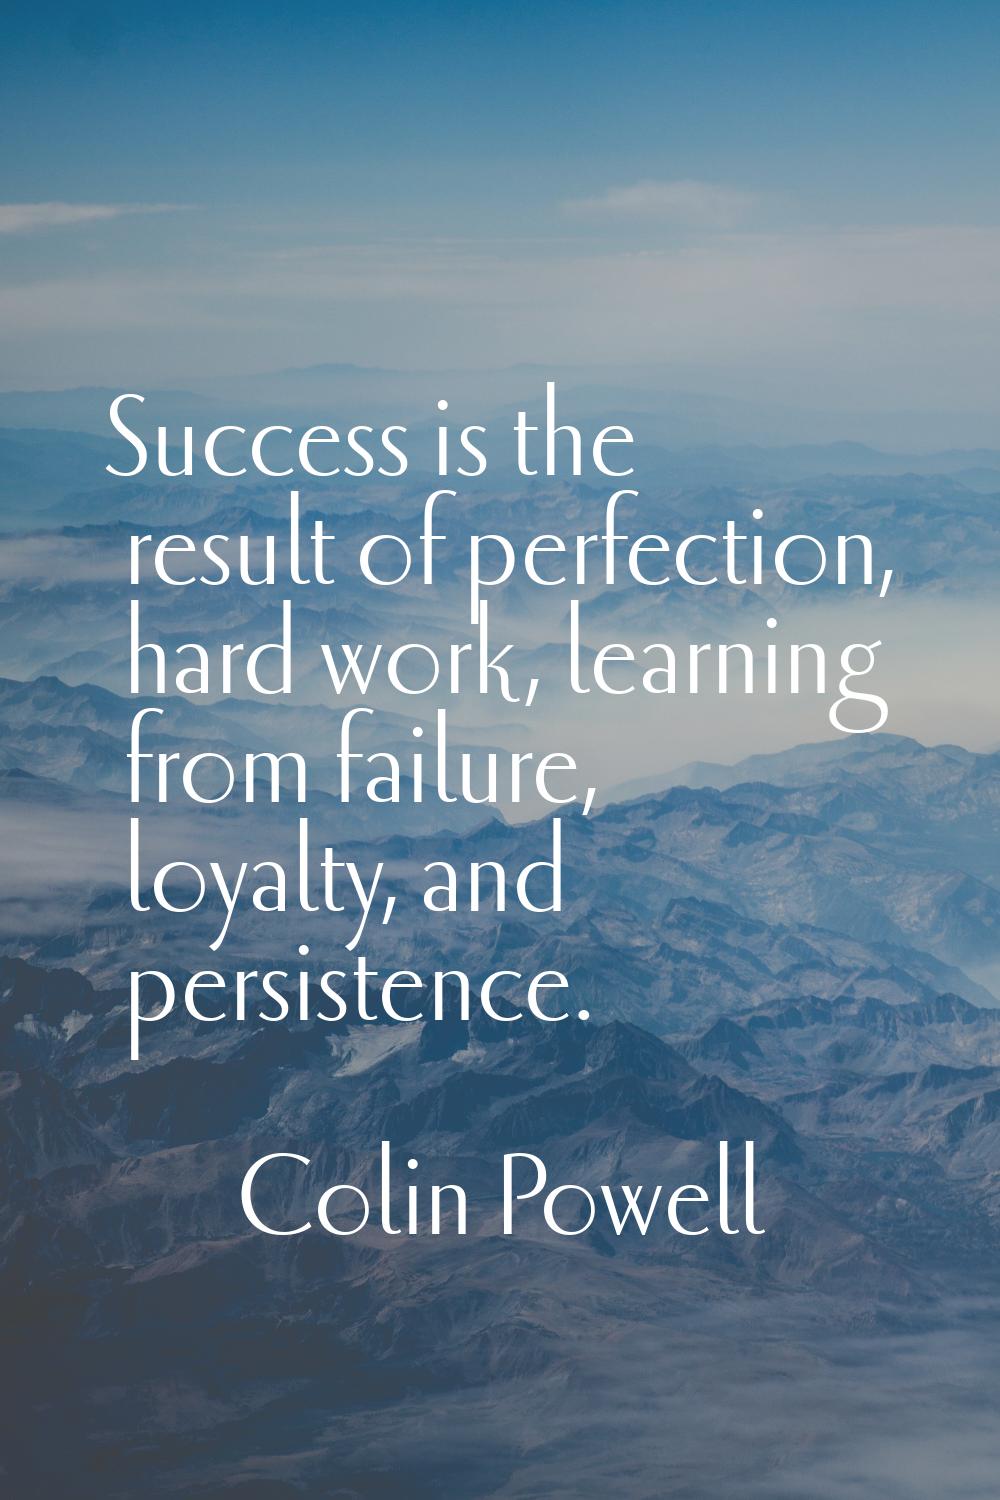 Success is the result of perfection, hard work, learning from failure, loyalty, and persistence.